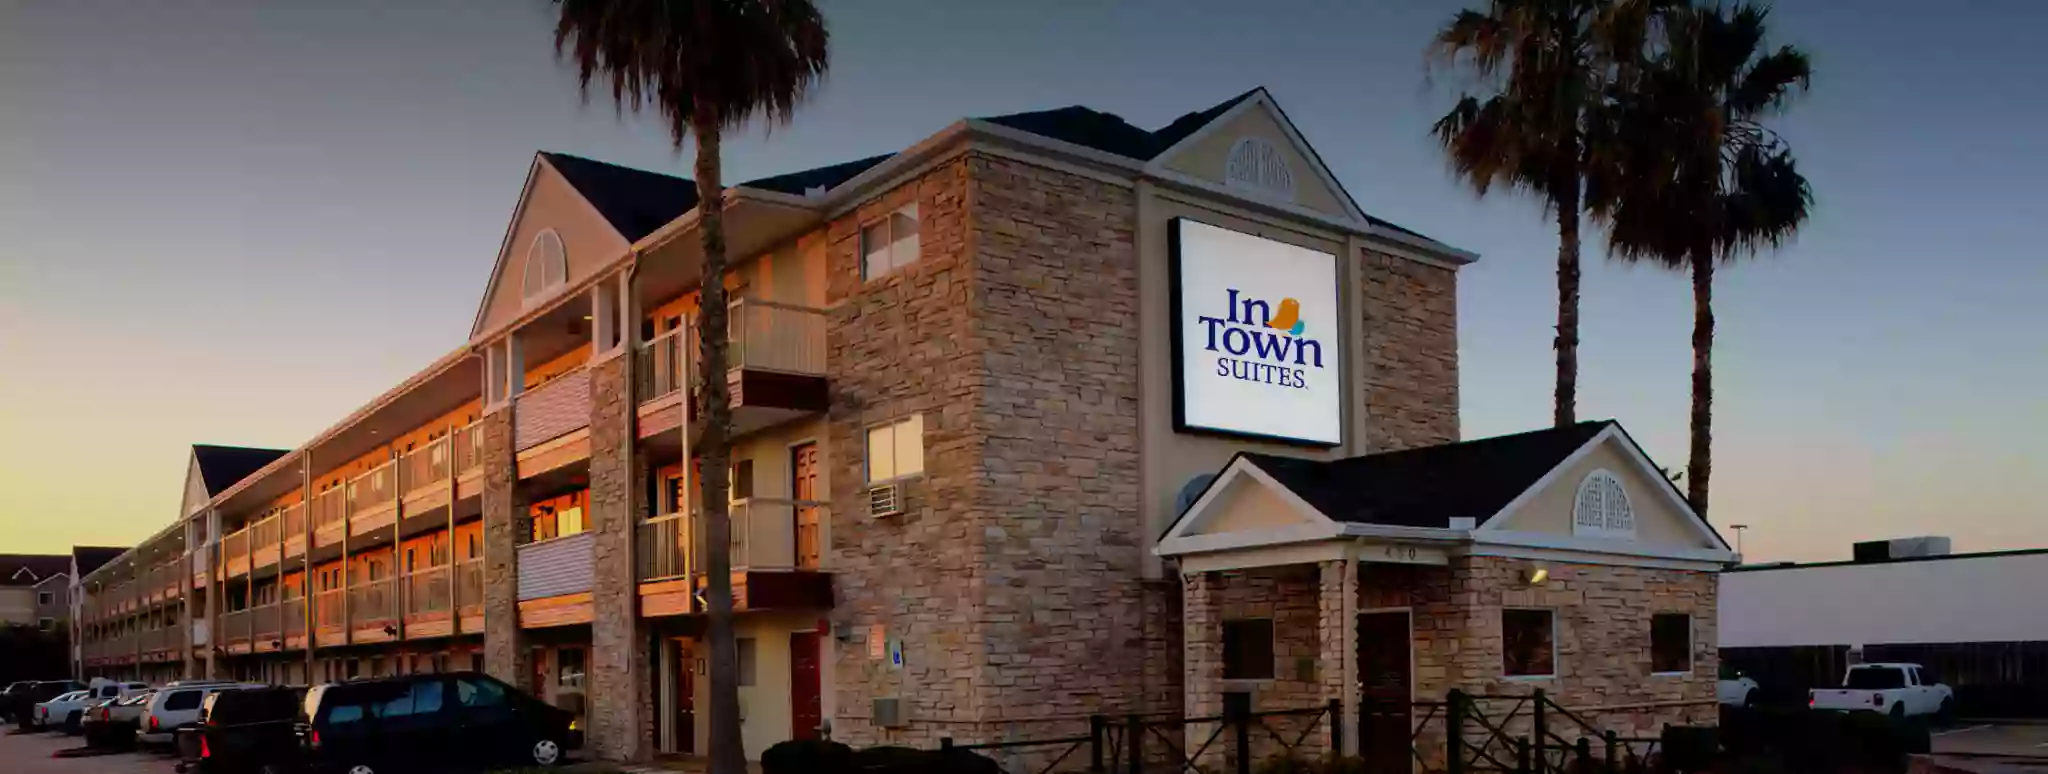 InTown Suites Extended Stay Anderson SC - Clemson University